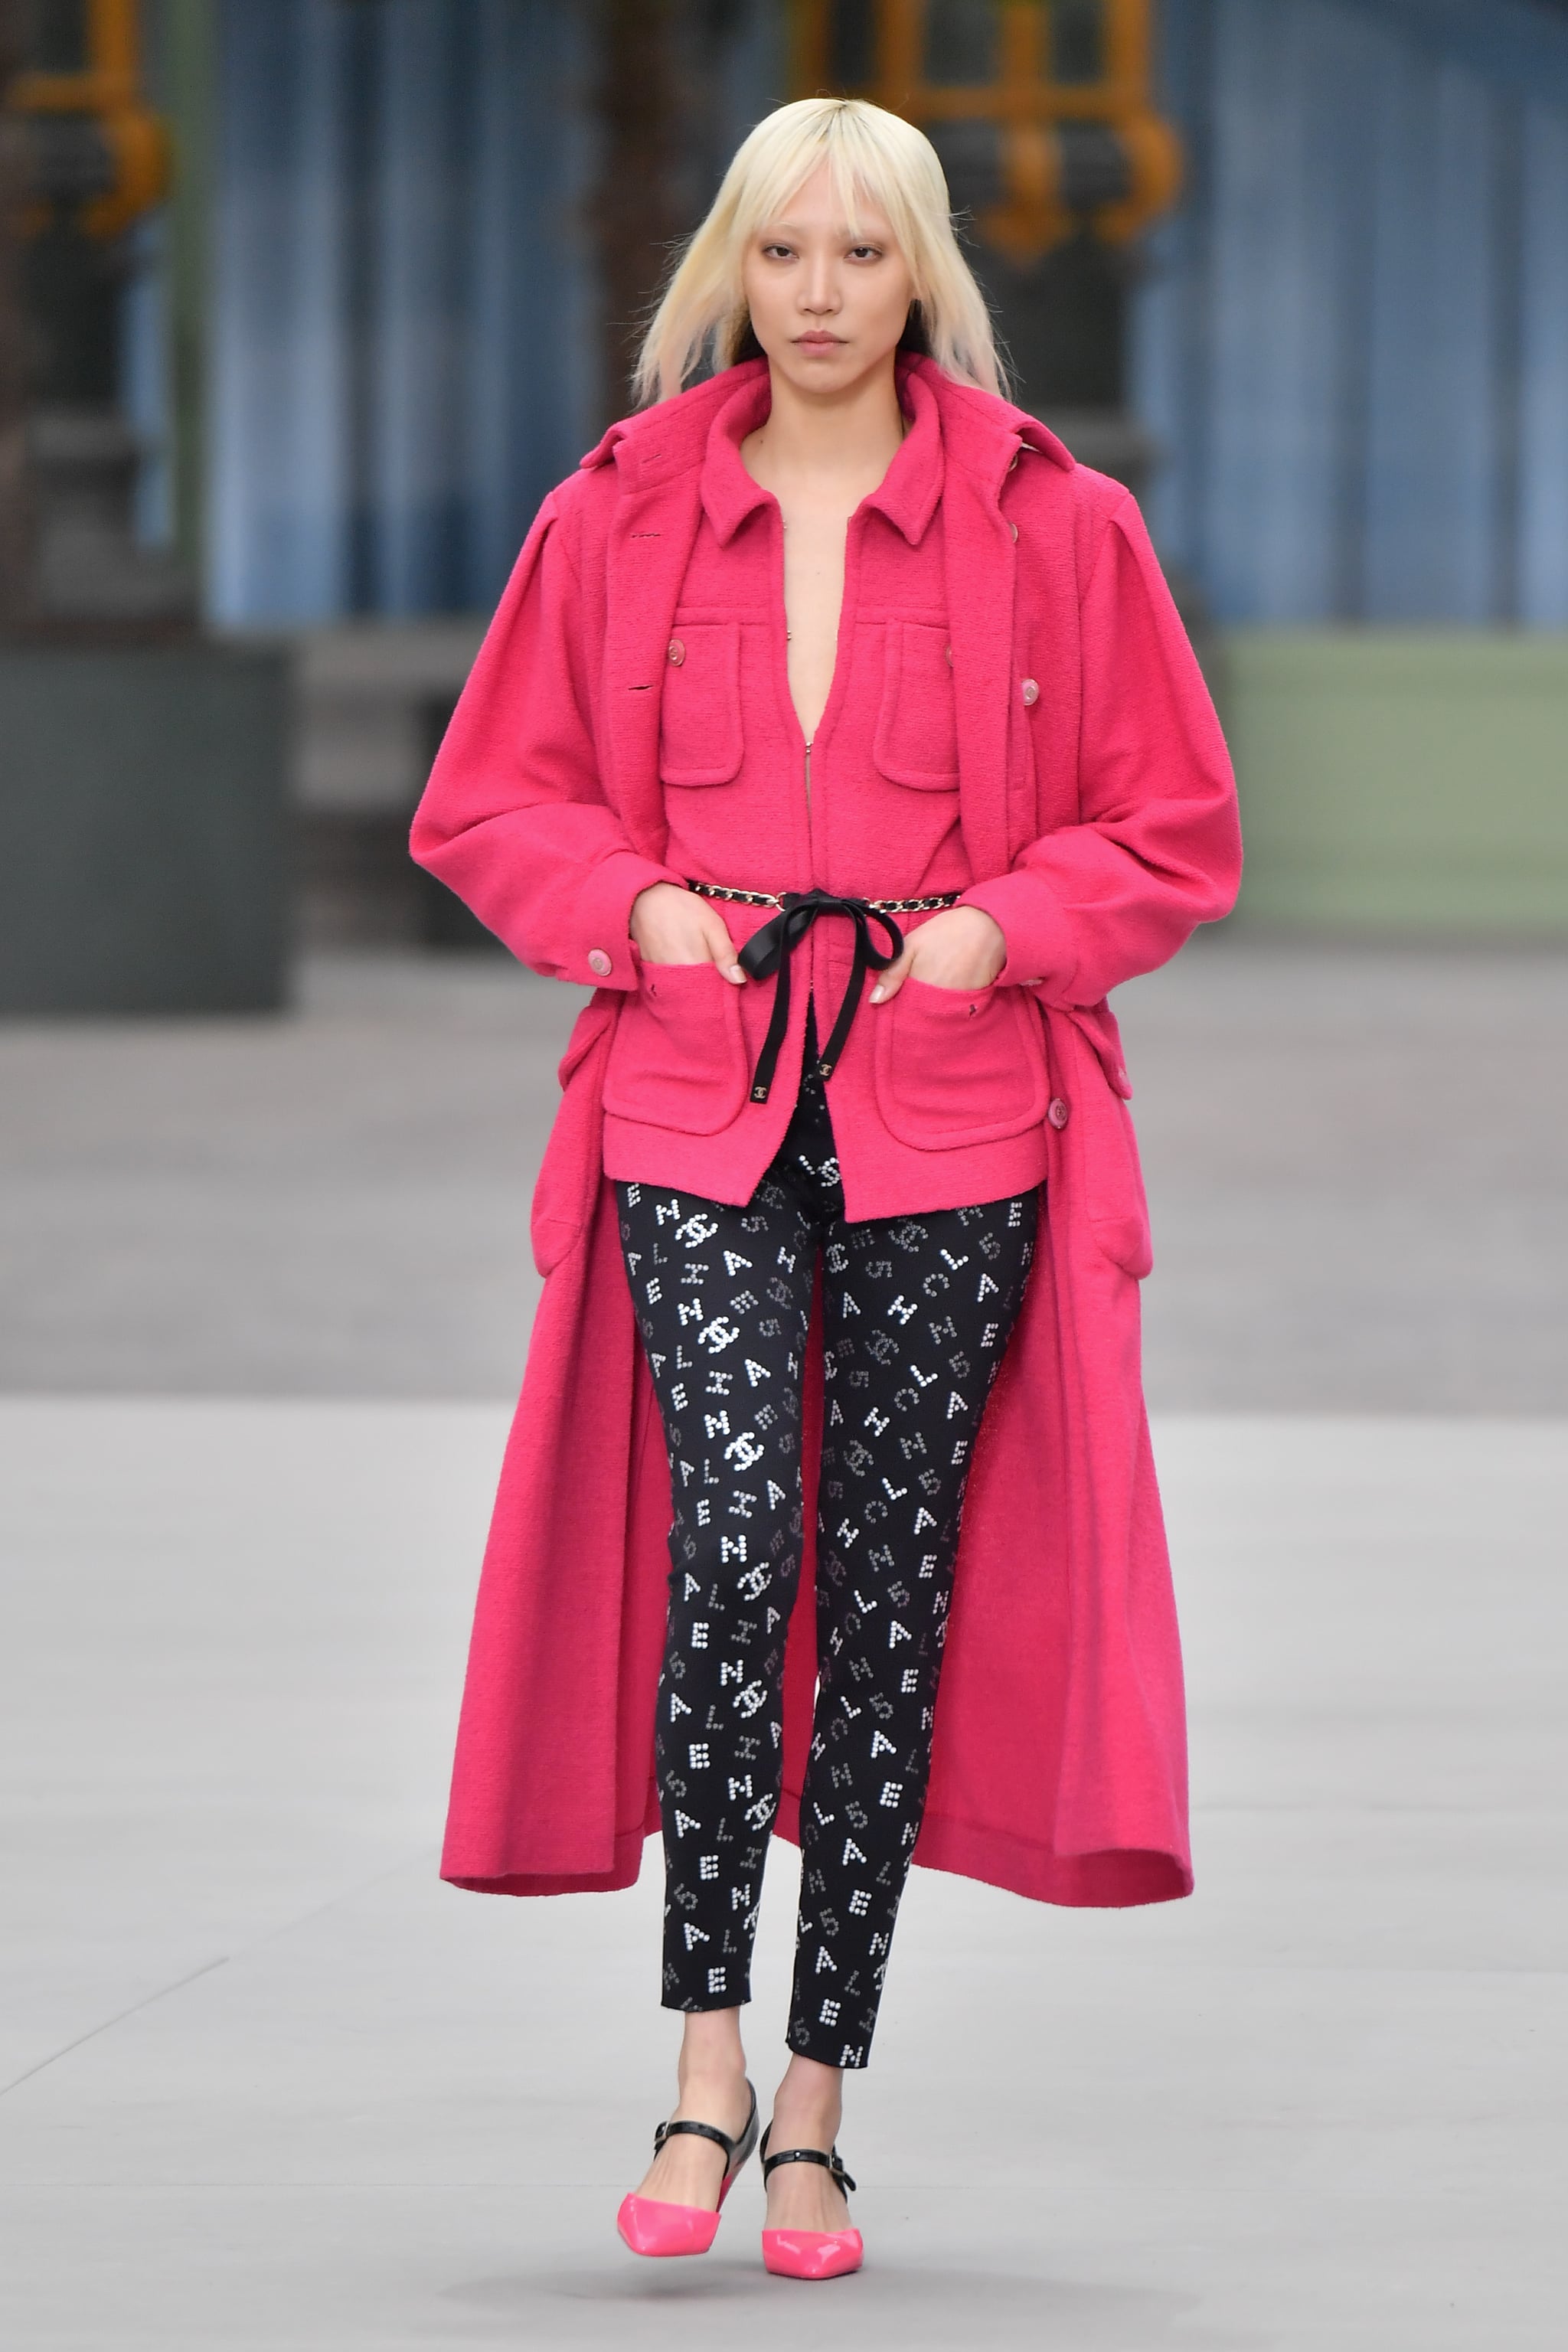 Hot Pink Added a Pop of Color | The Chanel Cruise Show Took Us on a Train  Ride Into the Future of the Label | POPSUGAR Fashion Photo 22